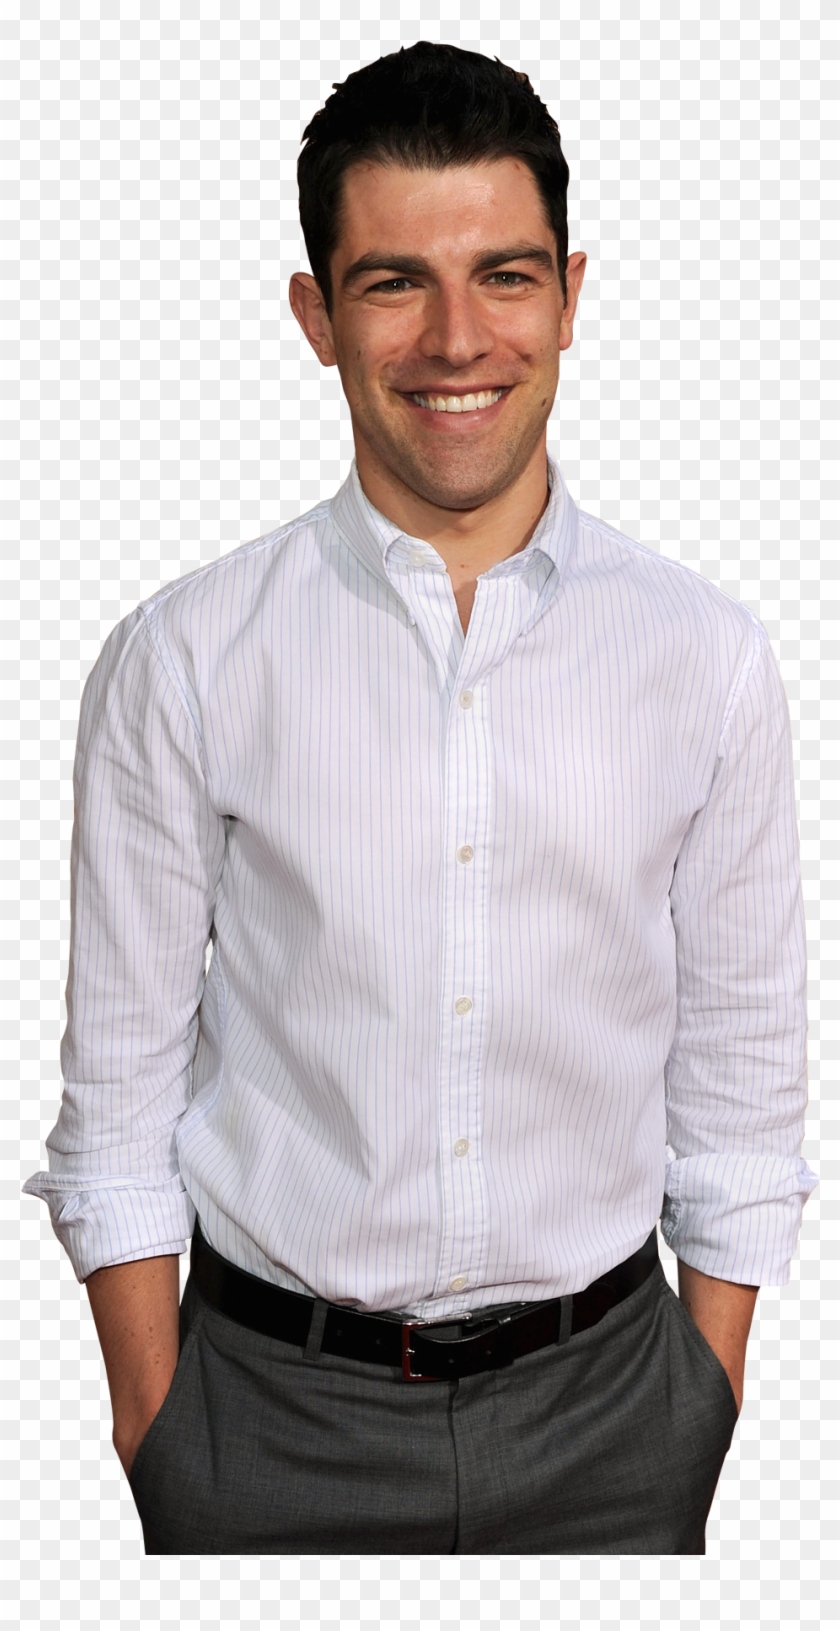 New Girl's Max Greenfield On Playing Schmidt, Liking - Schmidt New Girl Png Clipart #2813684